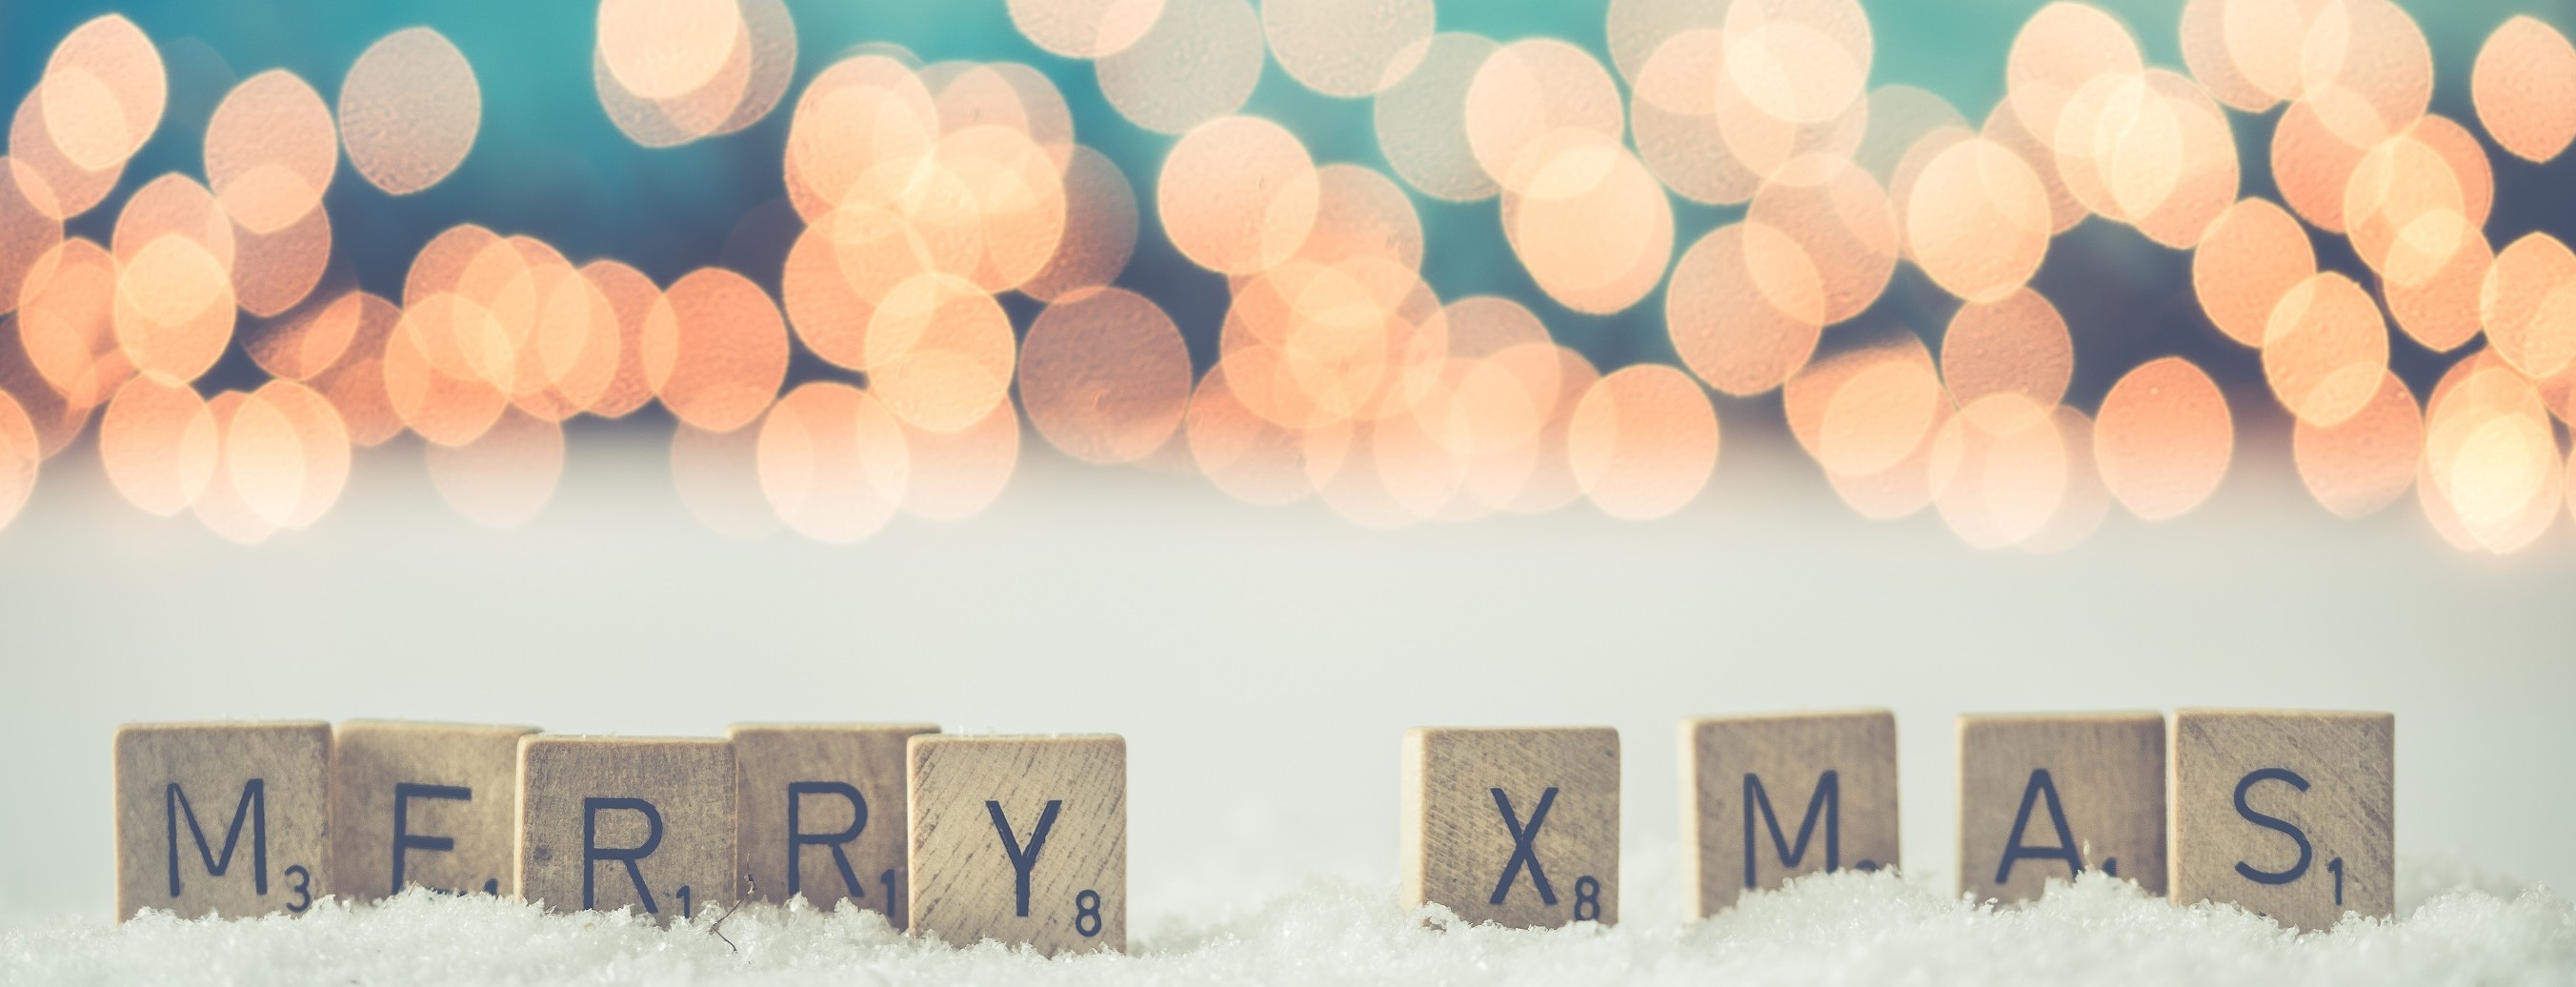 Merry Christmas from the Entyce team!